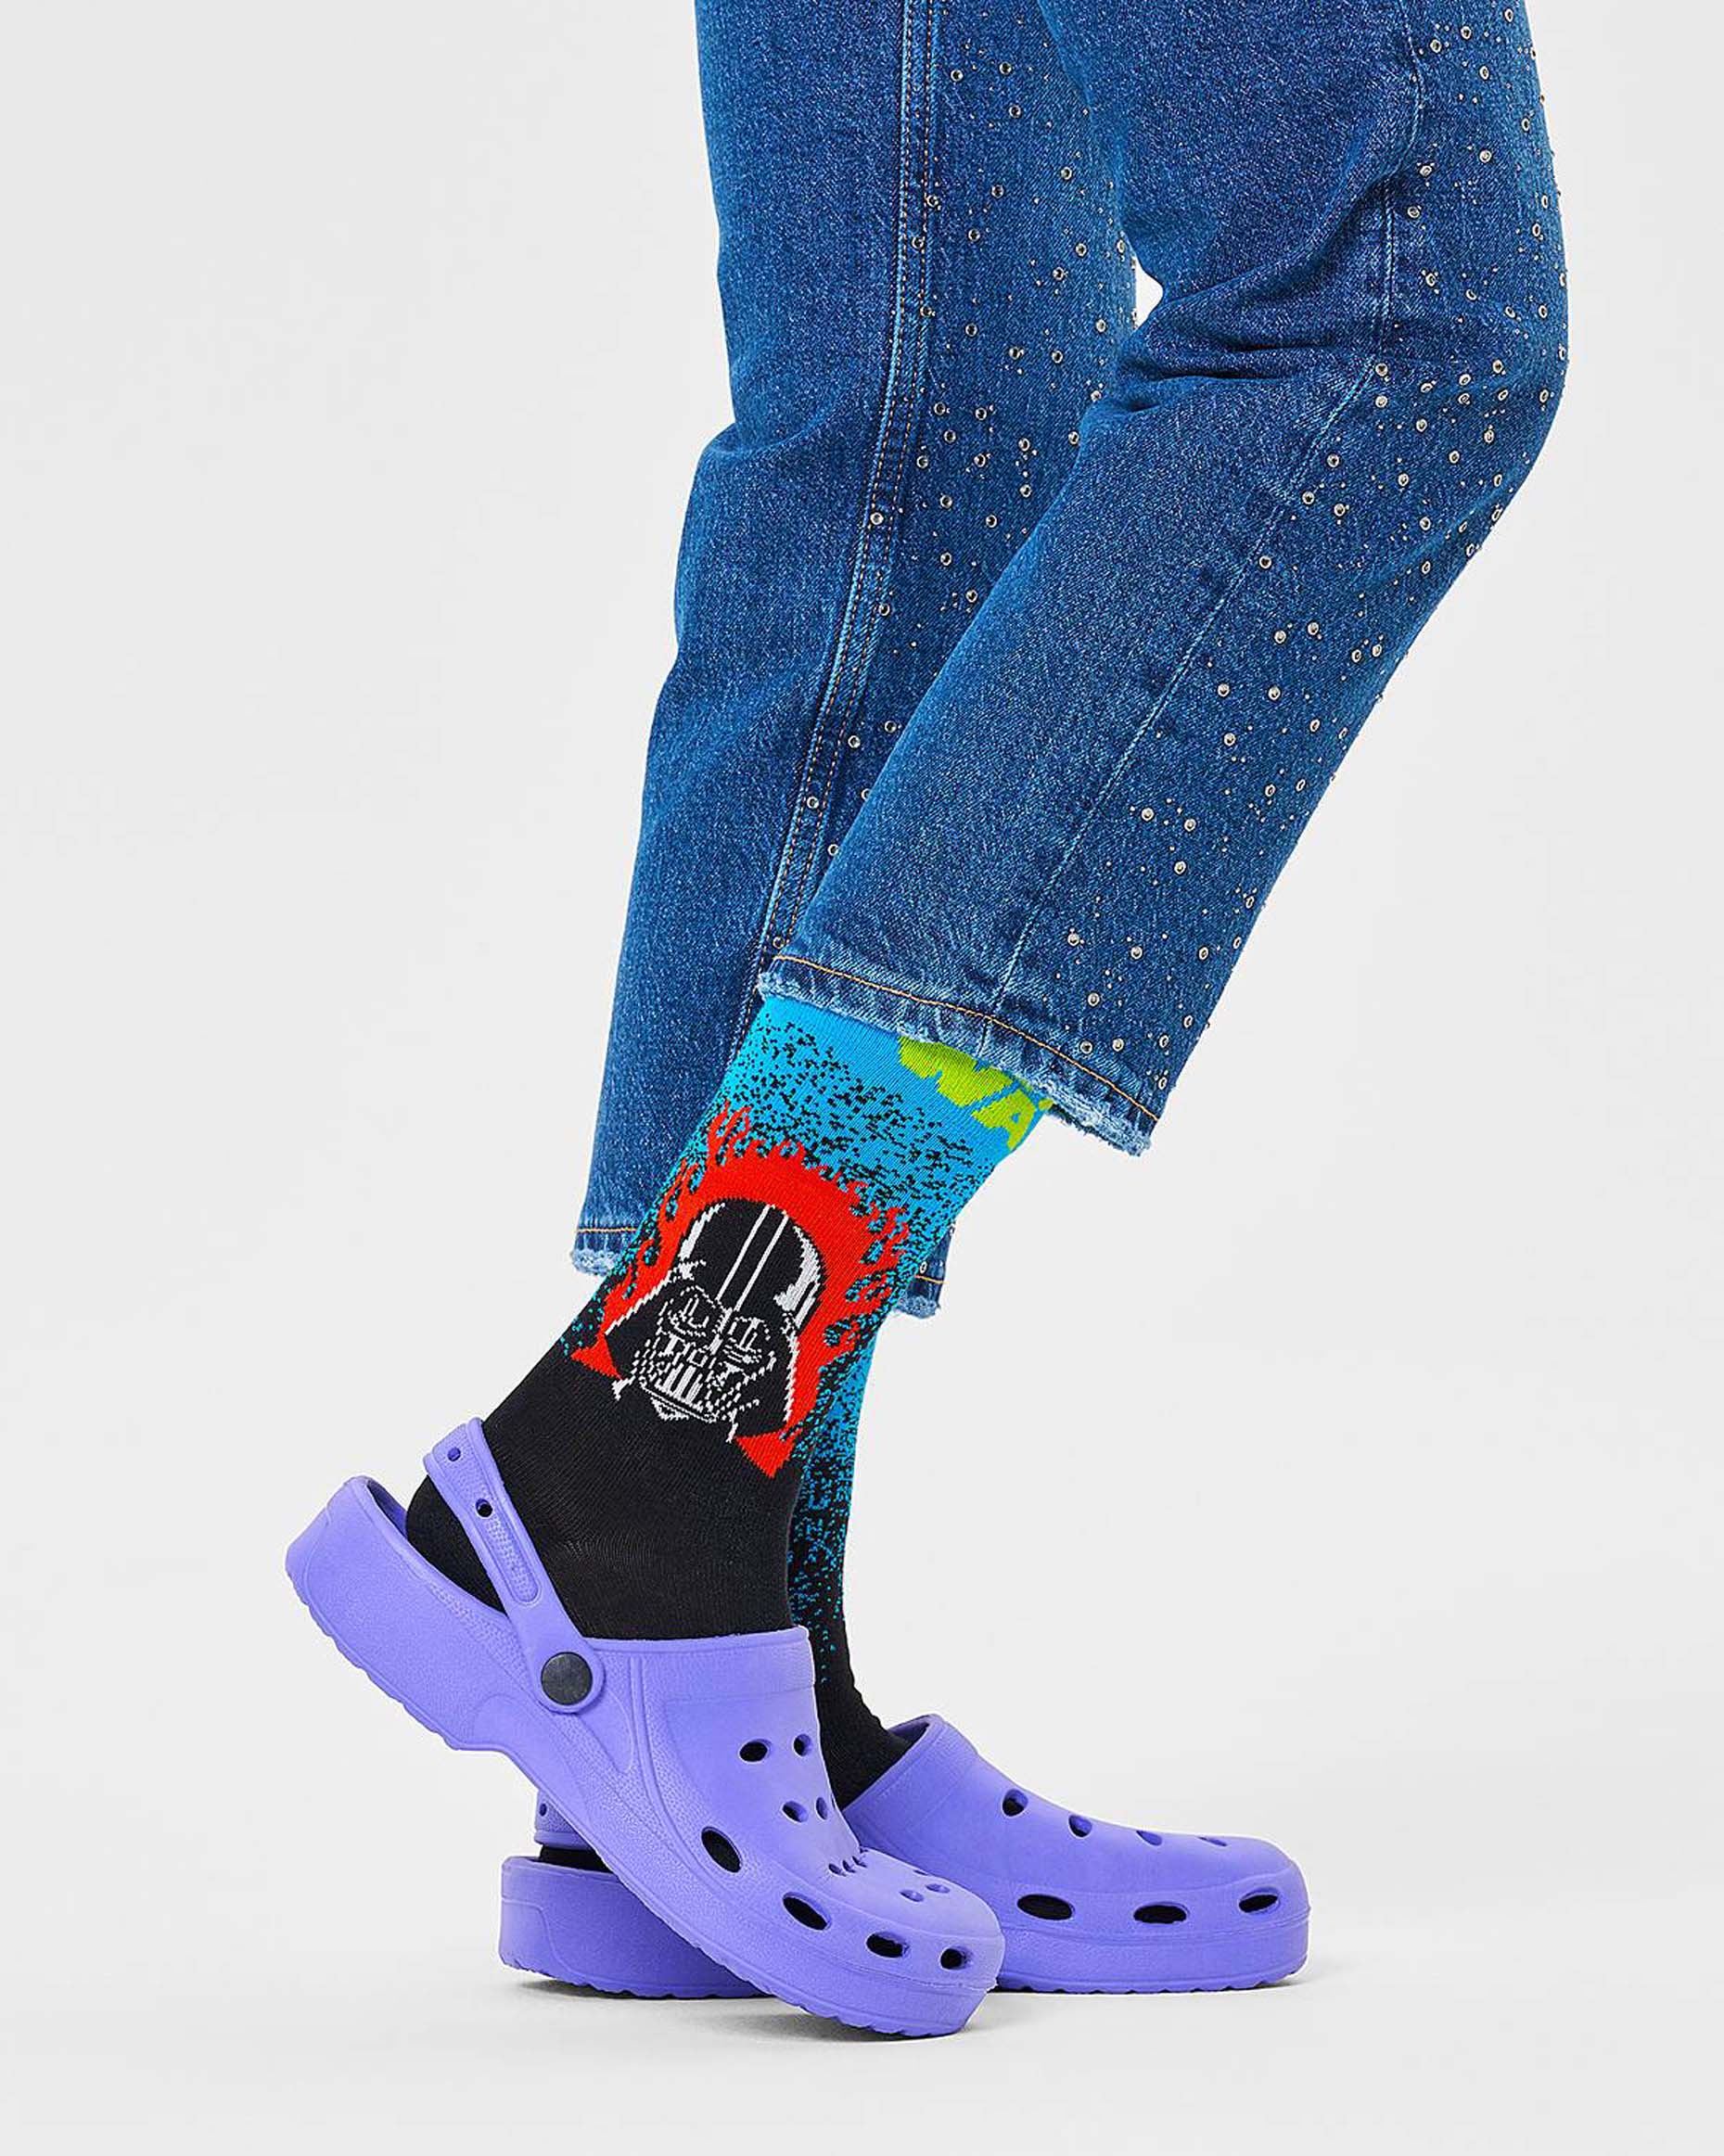 Happy Socks Darth Vader Sock - Women's cotton crew socks with an ombre/gradient effect going from blue on the top to black with a Darth Vader motif with flames in red, black and white and Star Wars logo in bright neon green worn with purple crocs and studded denim jeans.